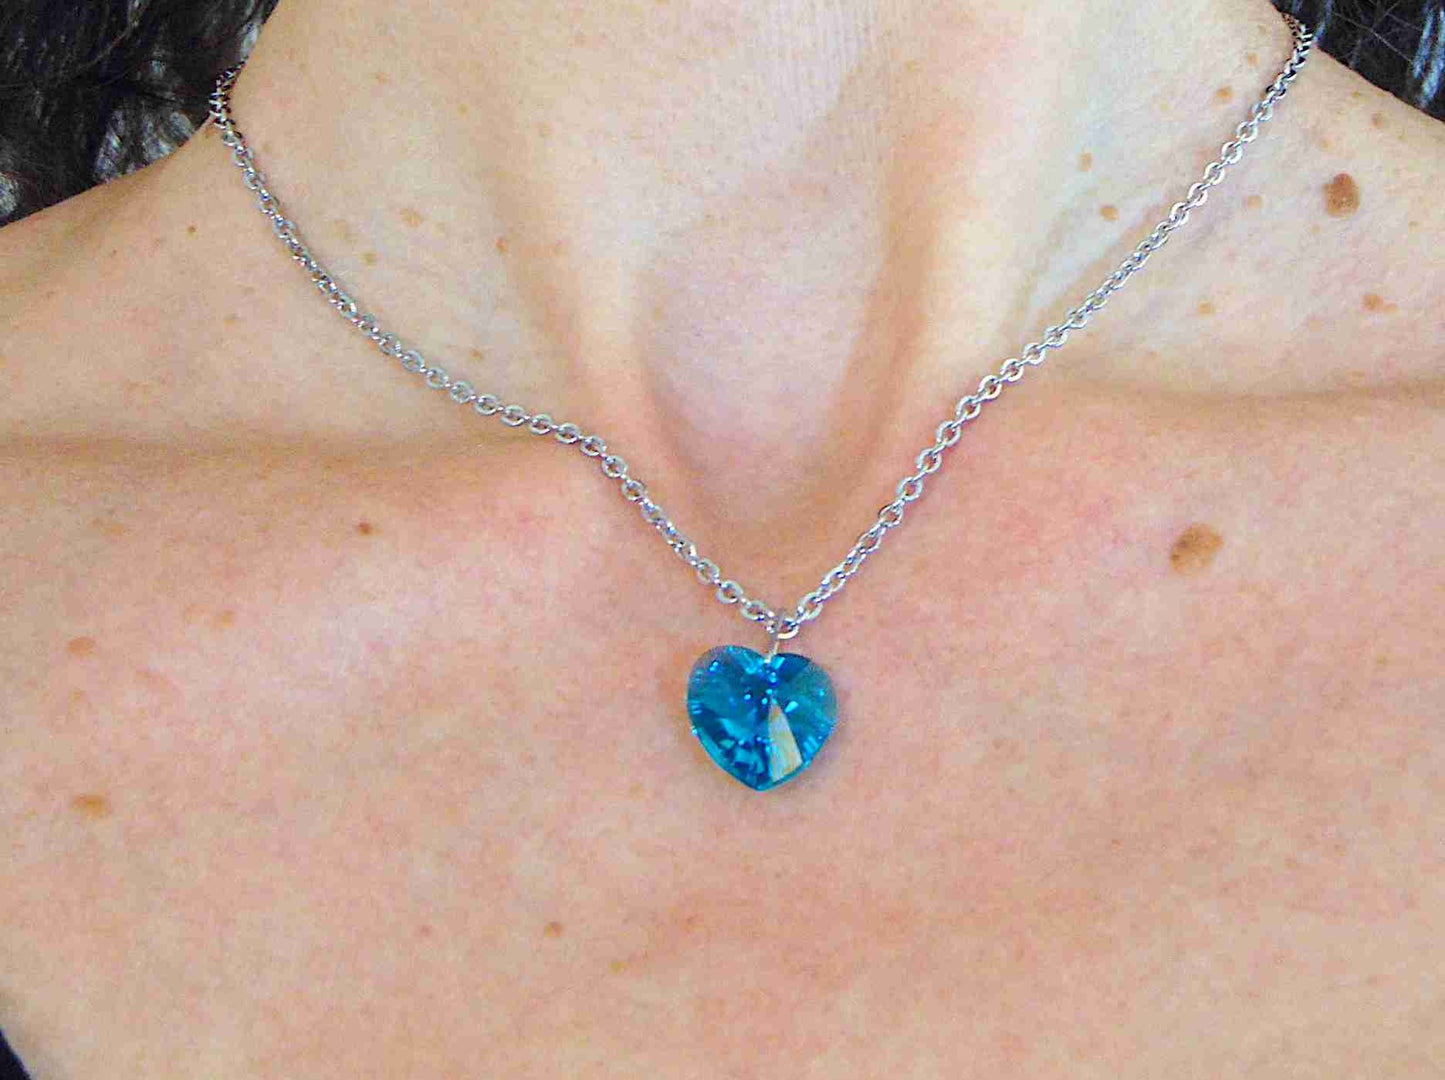 14/16-inch necklace with 14mm Blue Zircon faceted Swarovski crystal heart pendant, stainless steel chain